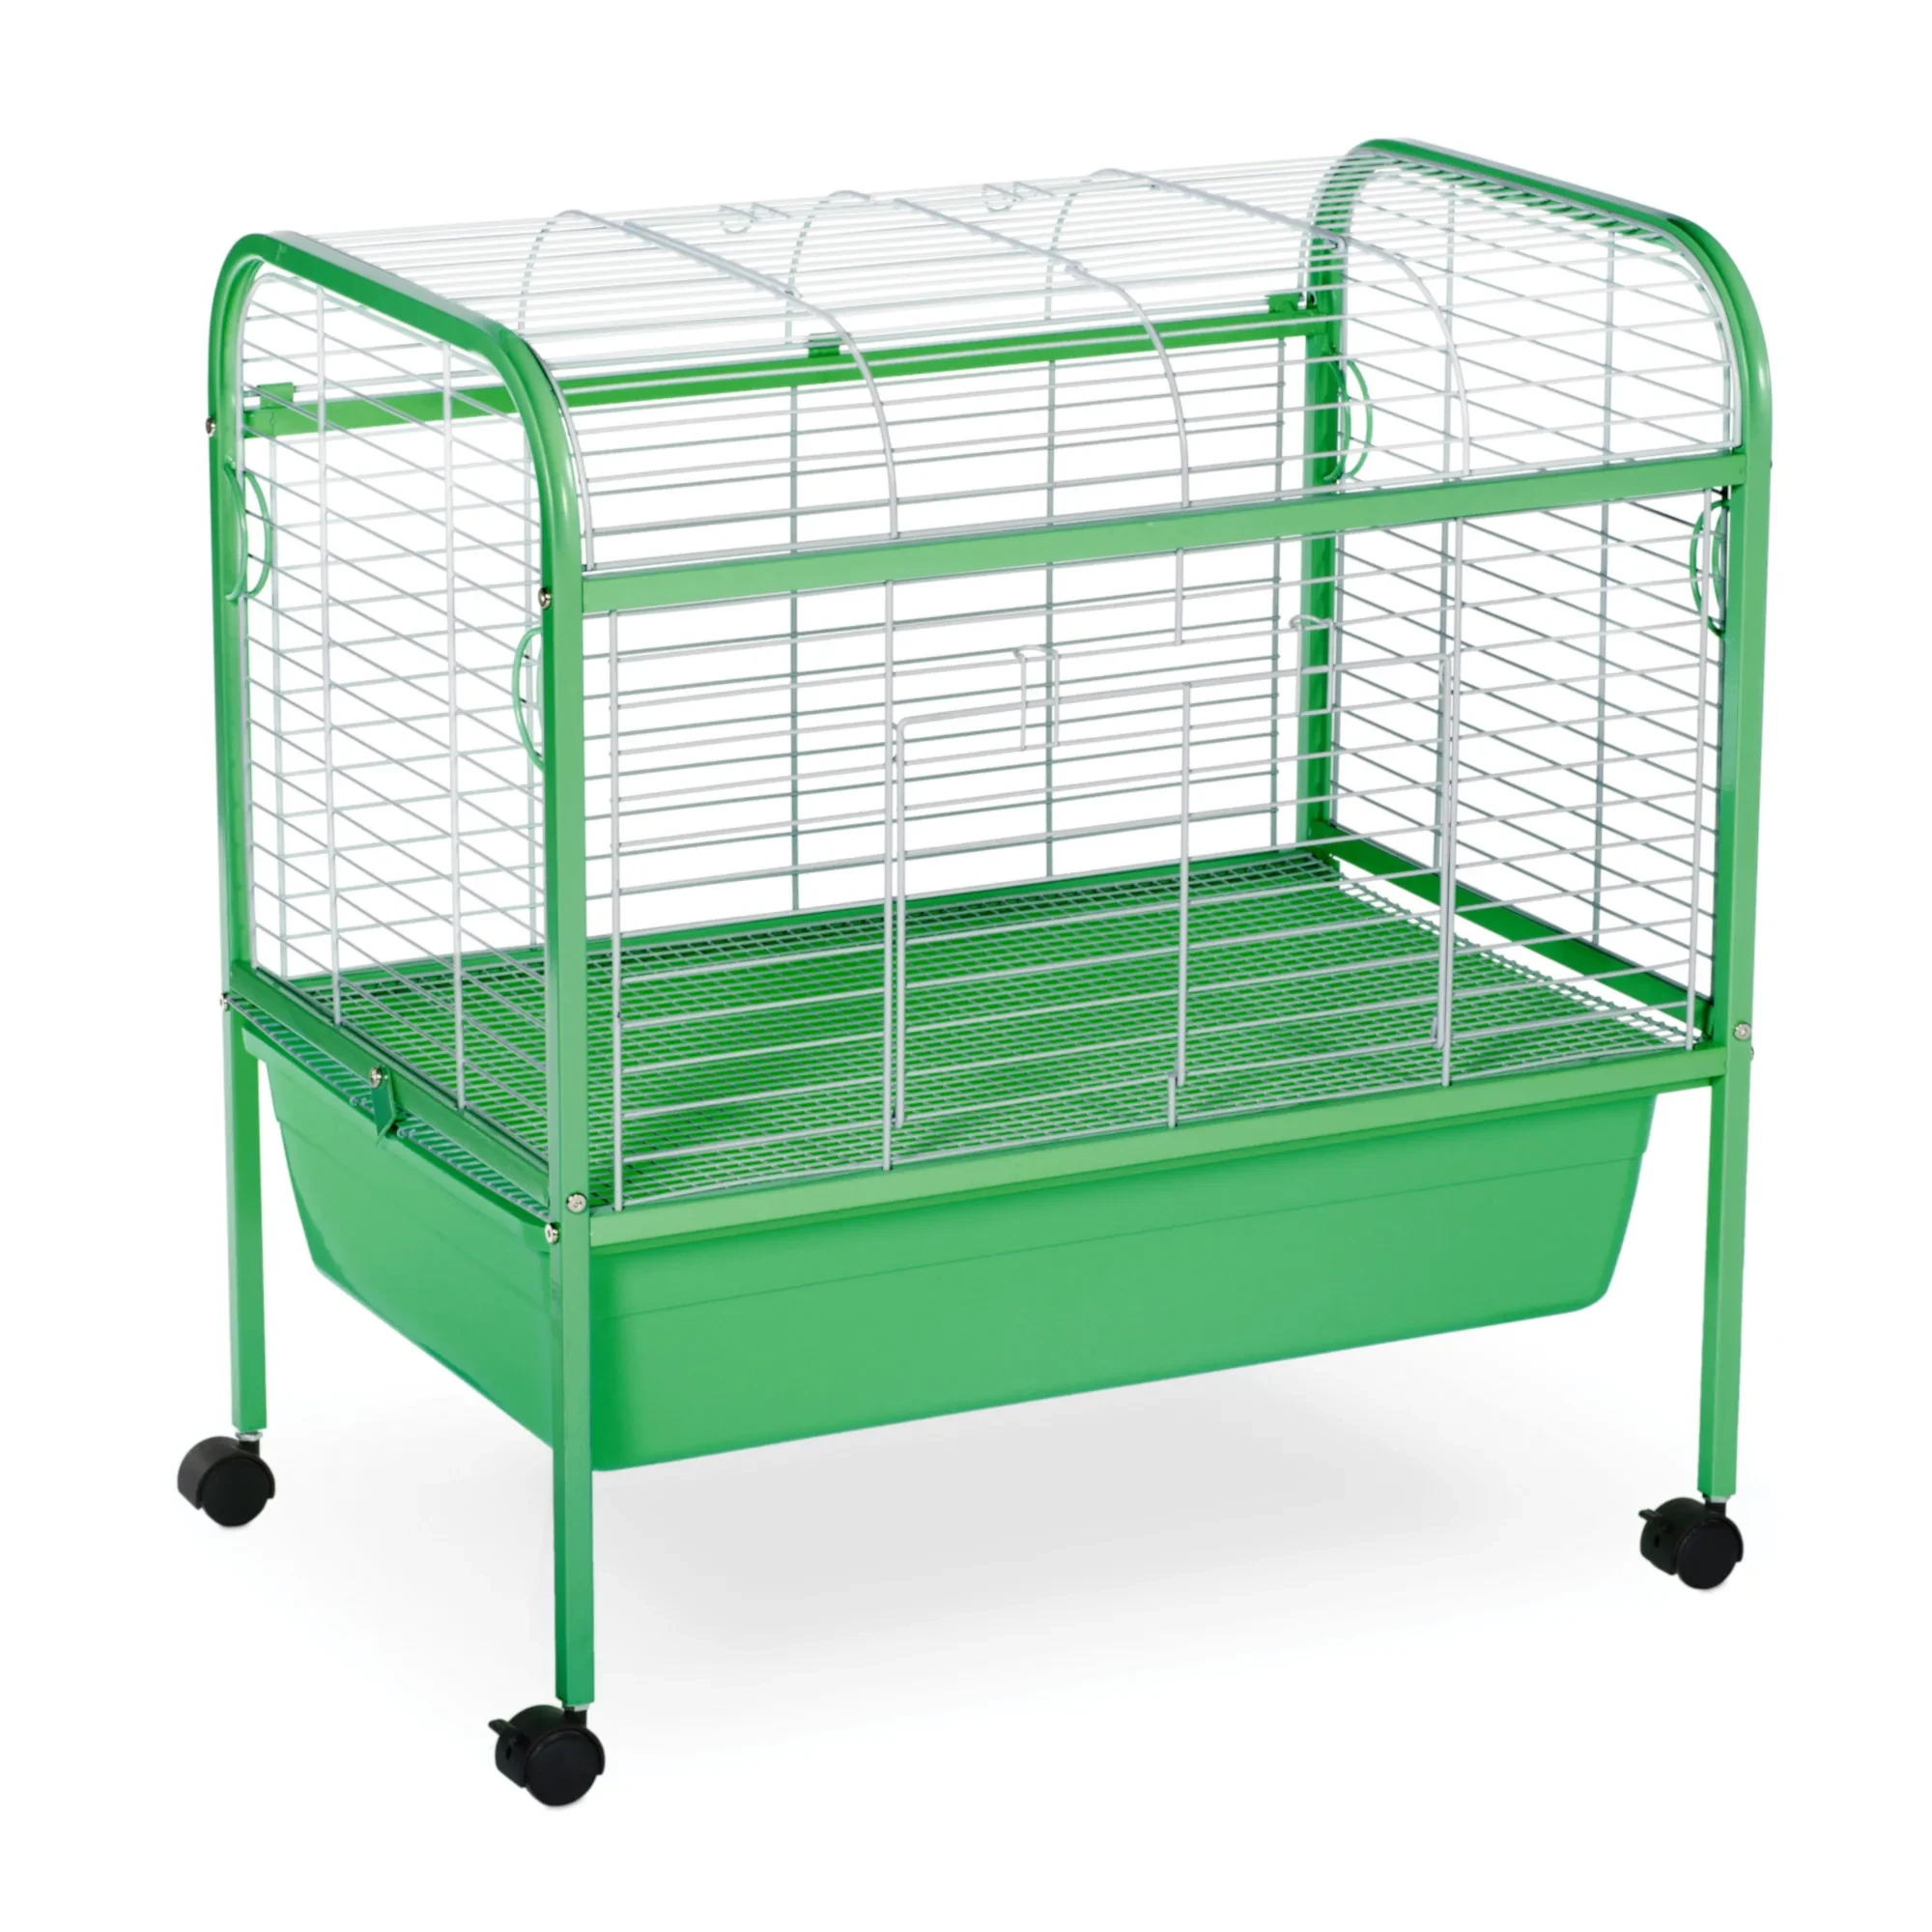 Prevue Pet Products Grass Green & White Small Animal Cage with Stand, 29" L X 19" W X 31" H